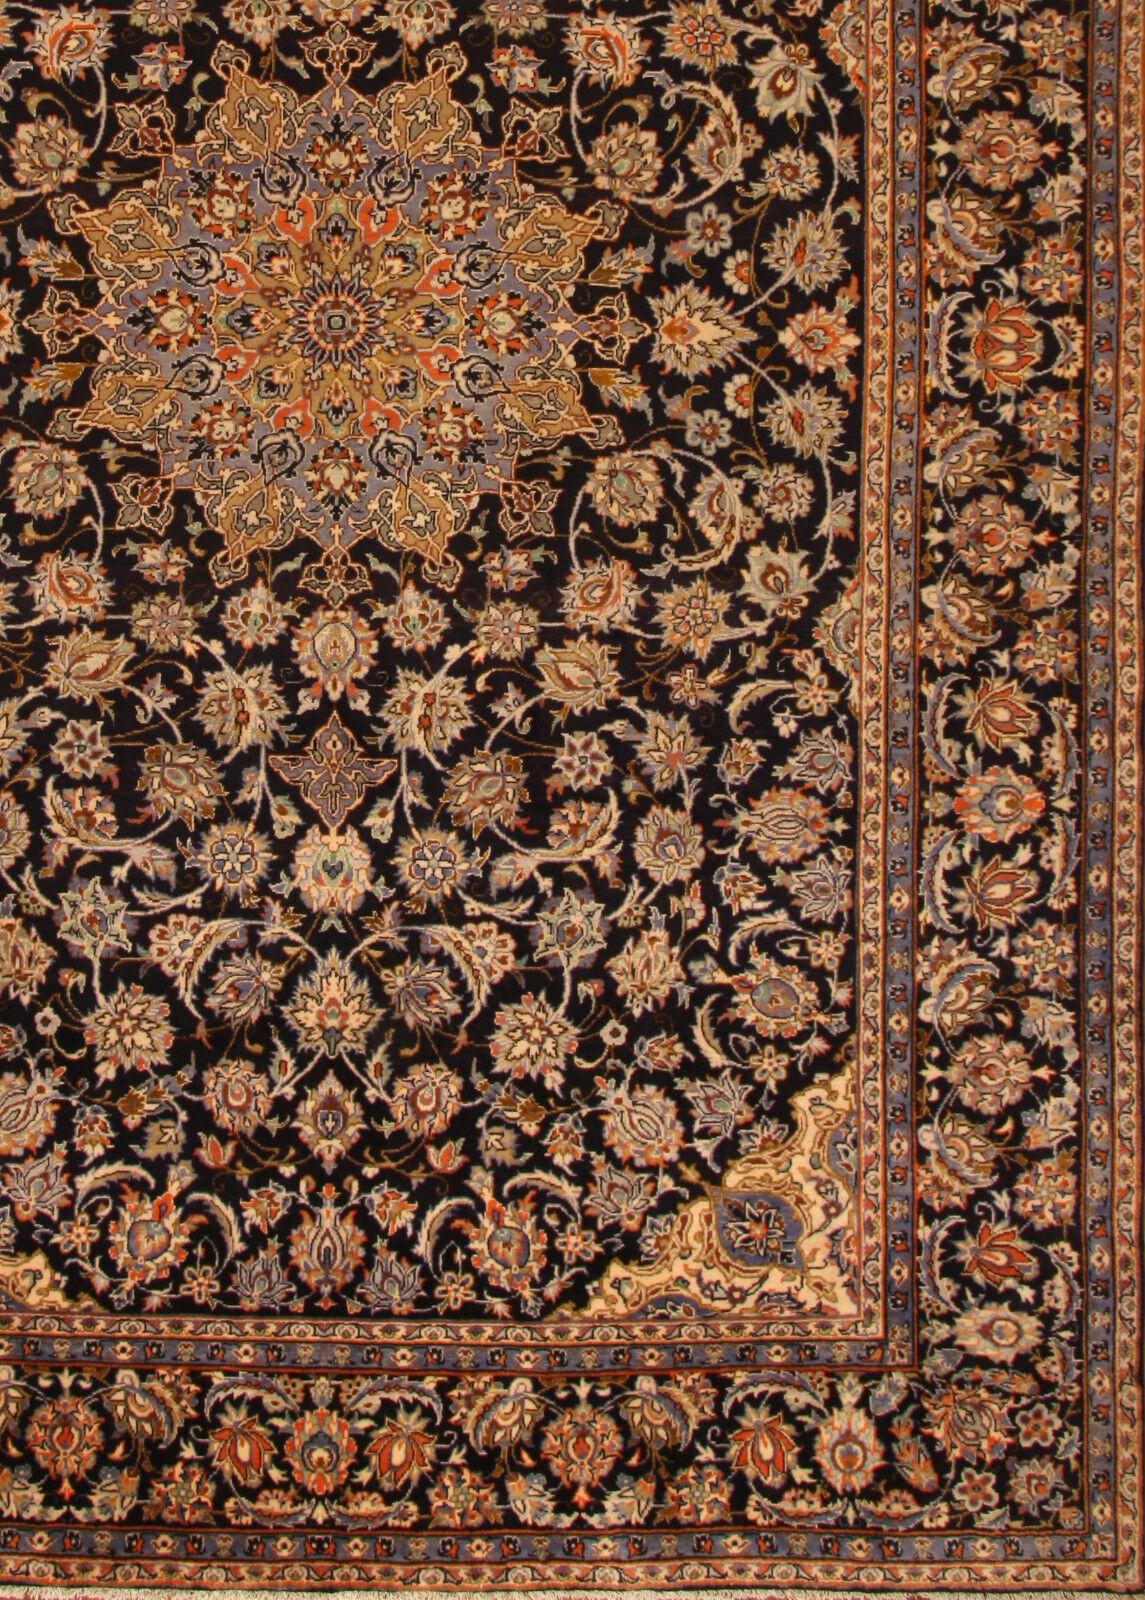 Handmade Vintage Persian Style Tabriz Rug 9.5' x 14.5', 1970s - 1T35 For Sale 4